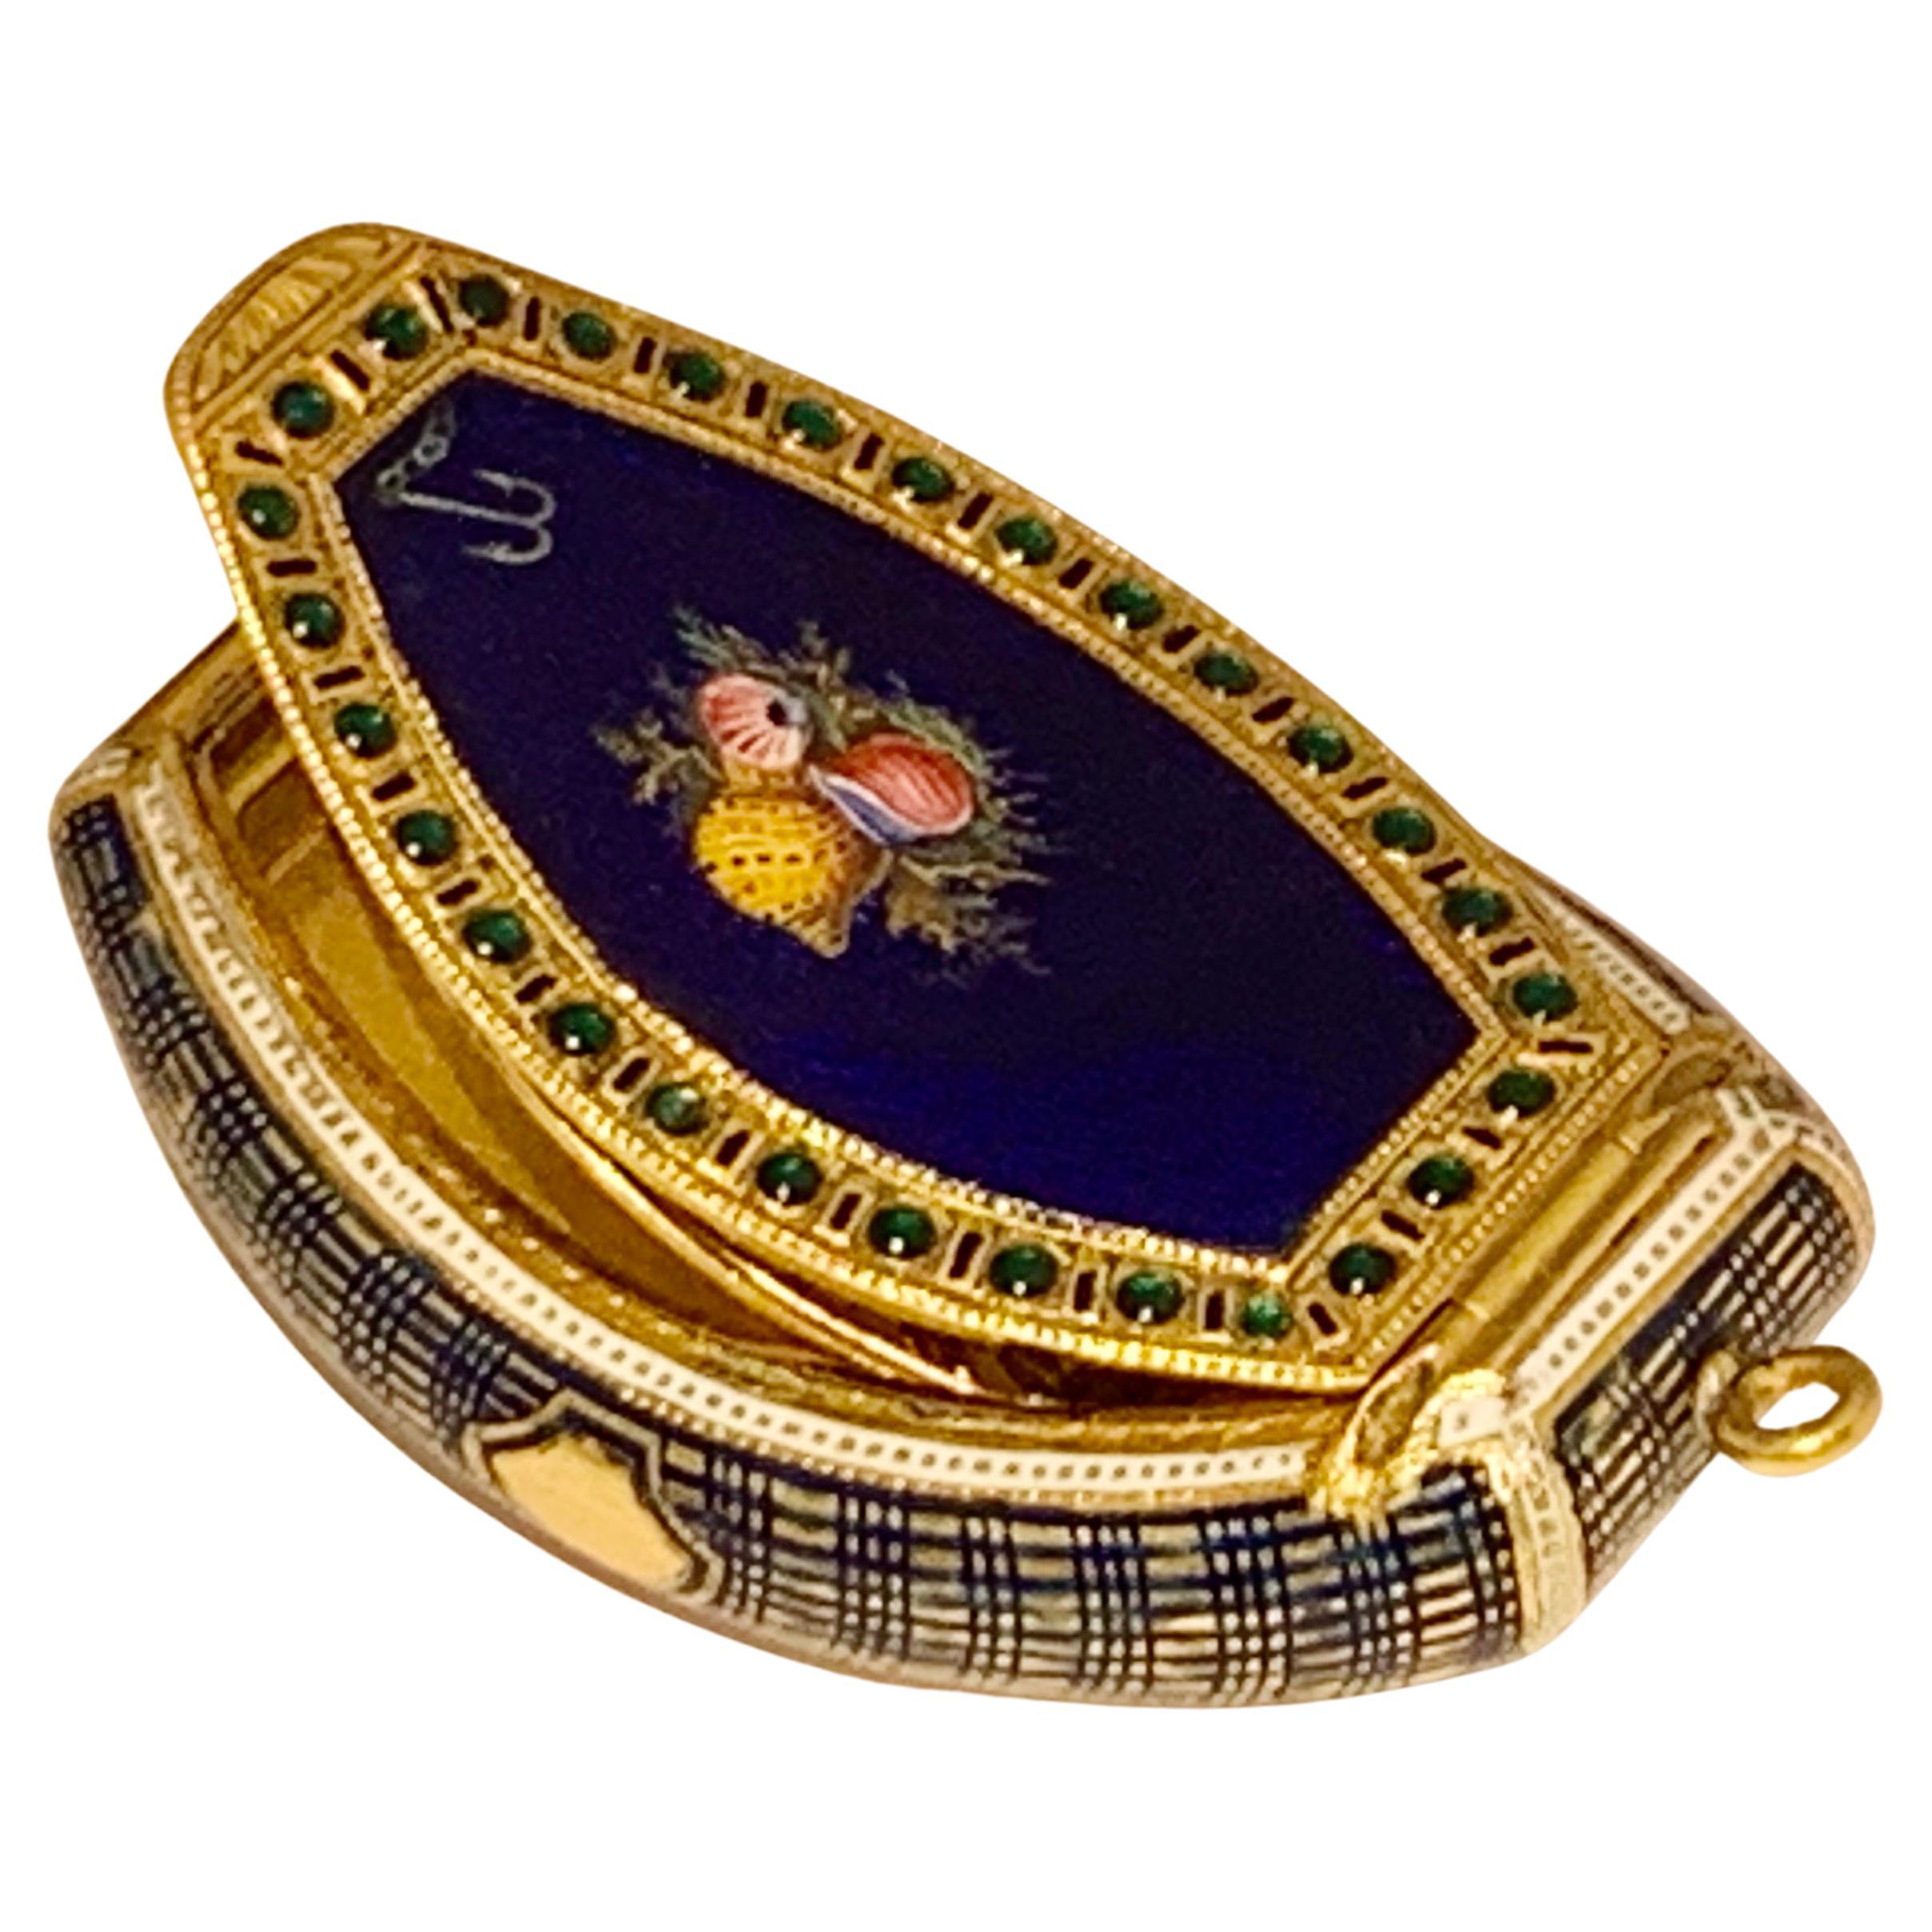 Seltene Schweizer Gold & Emaille Jeweled Vinaigrette Box Late 18th C.